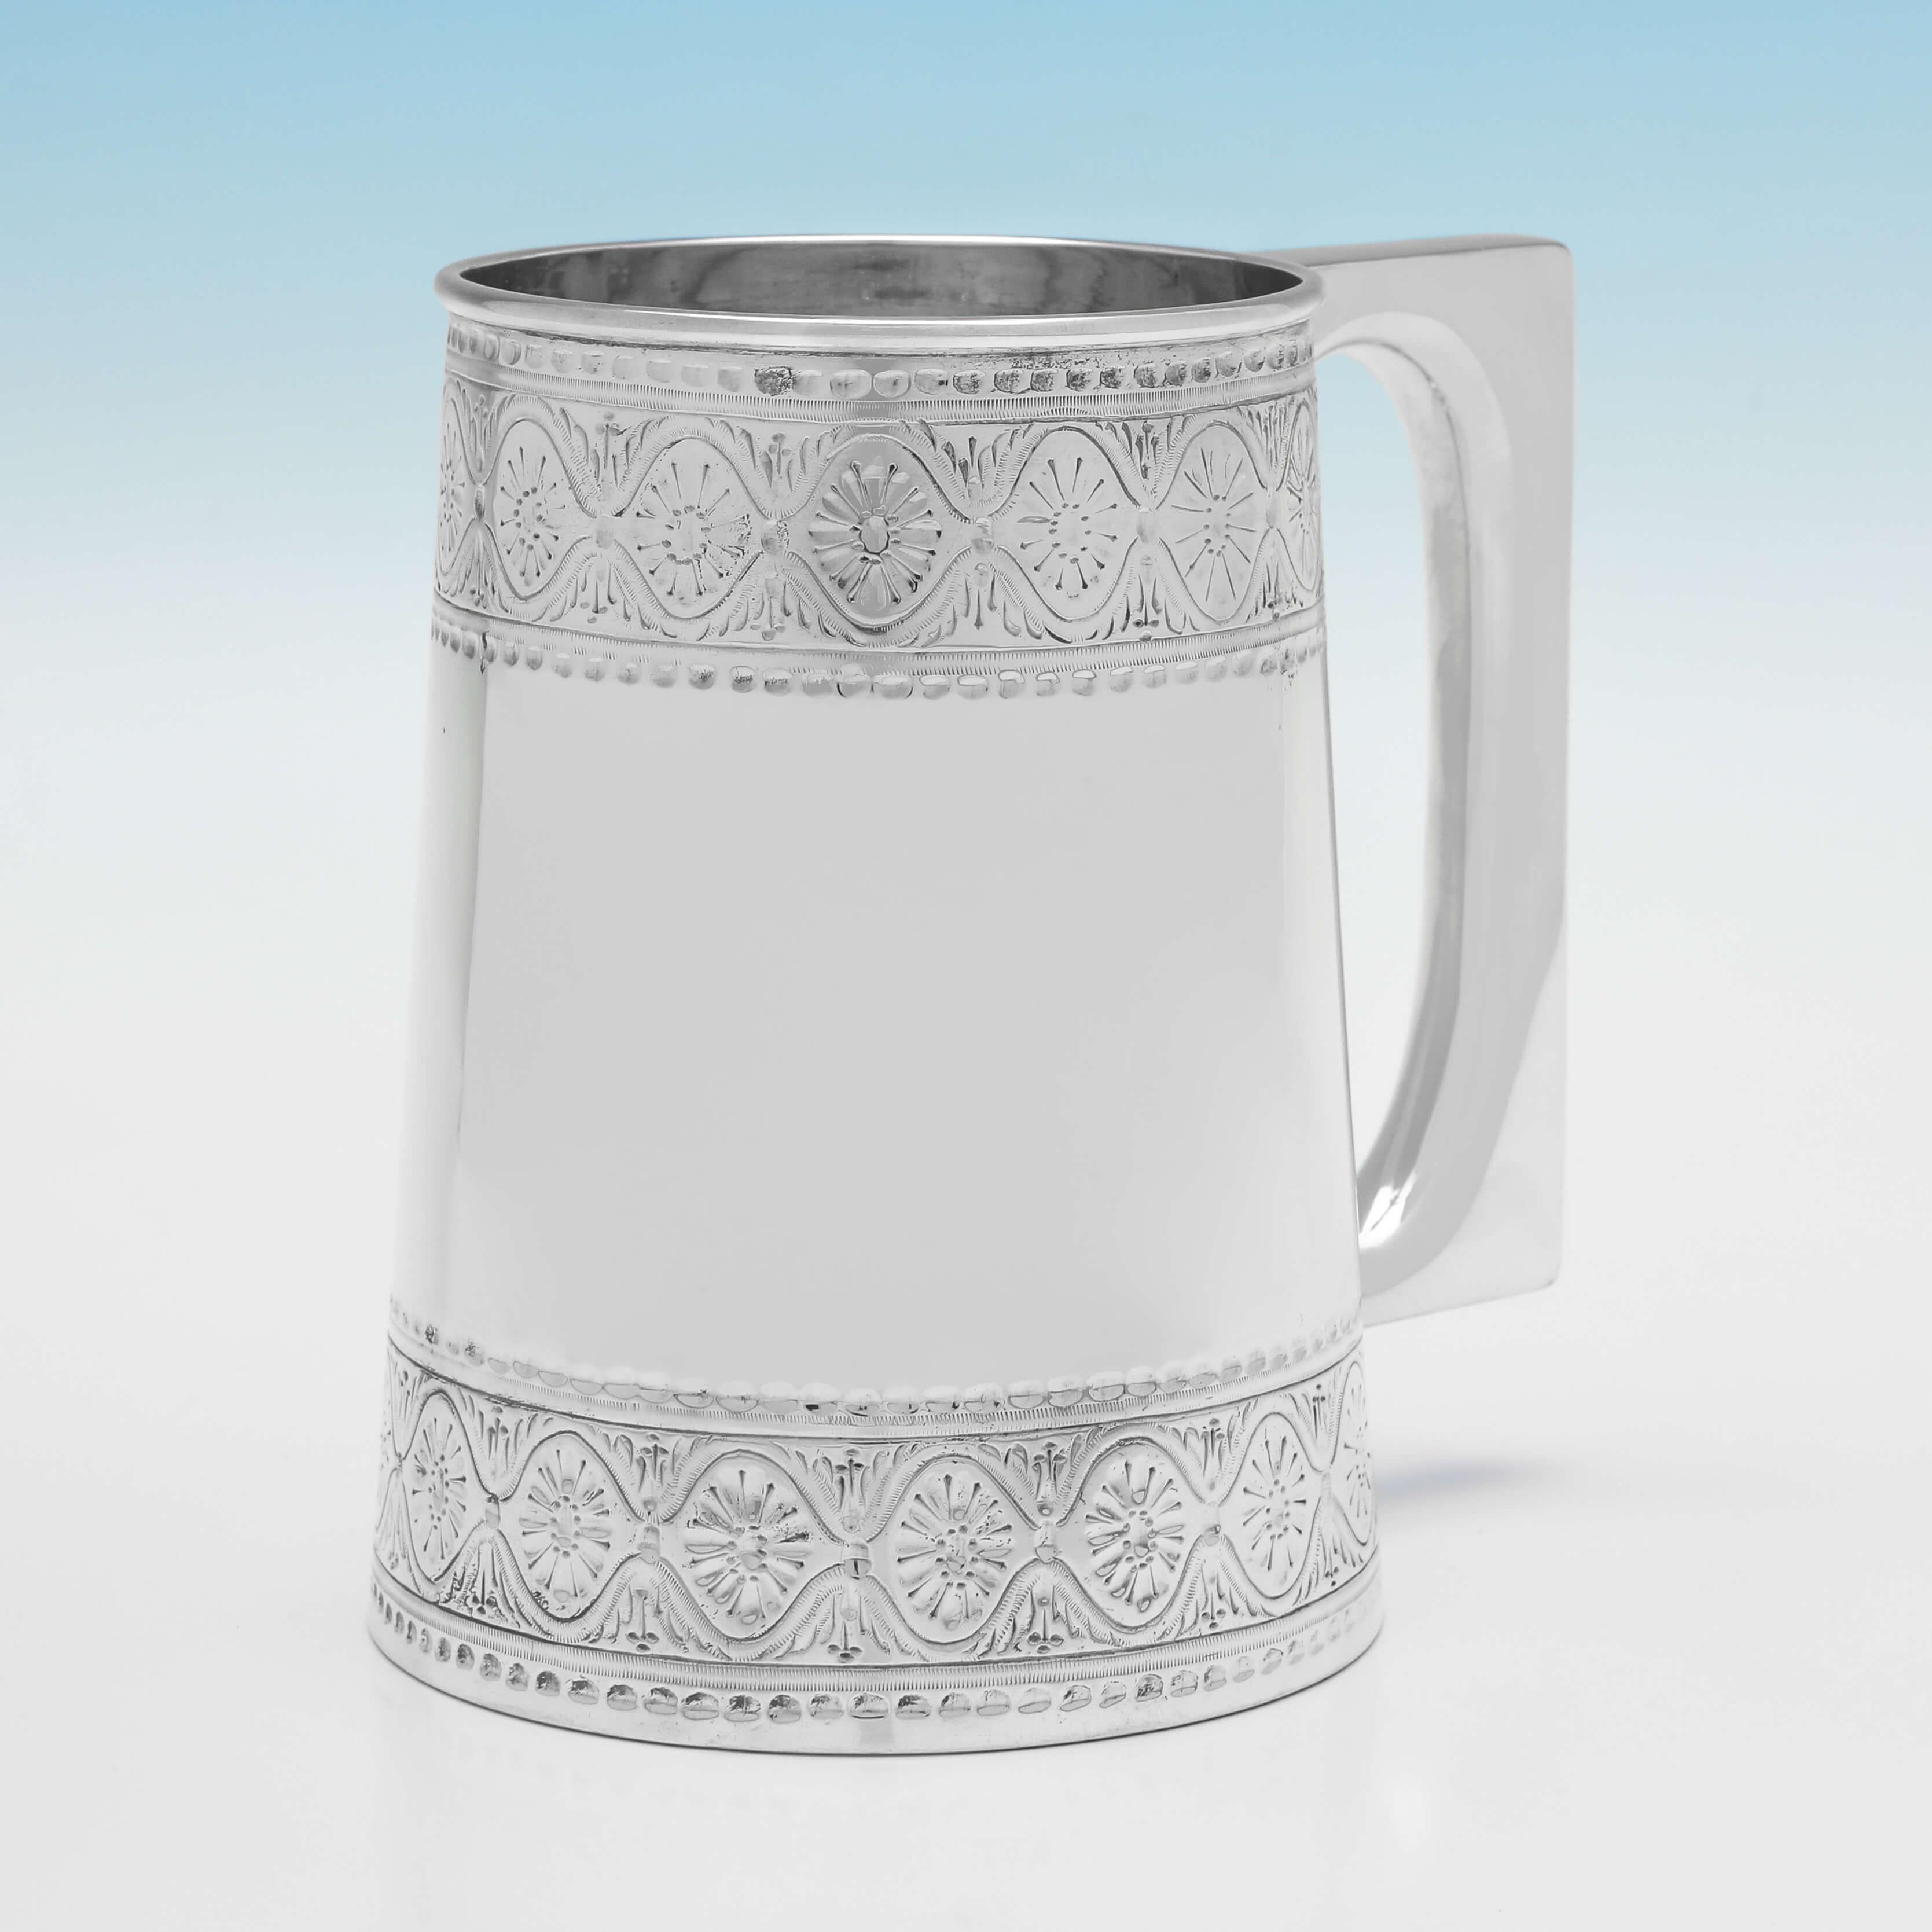 Hallmarked in Sheffield in 1891 by Gibson & Langman, this handsome, victorian, antique, sterling silver tankard, is straight sided, and features a glass bottom, and engraved bands to the rim and base.

The mug measures: 4.75